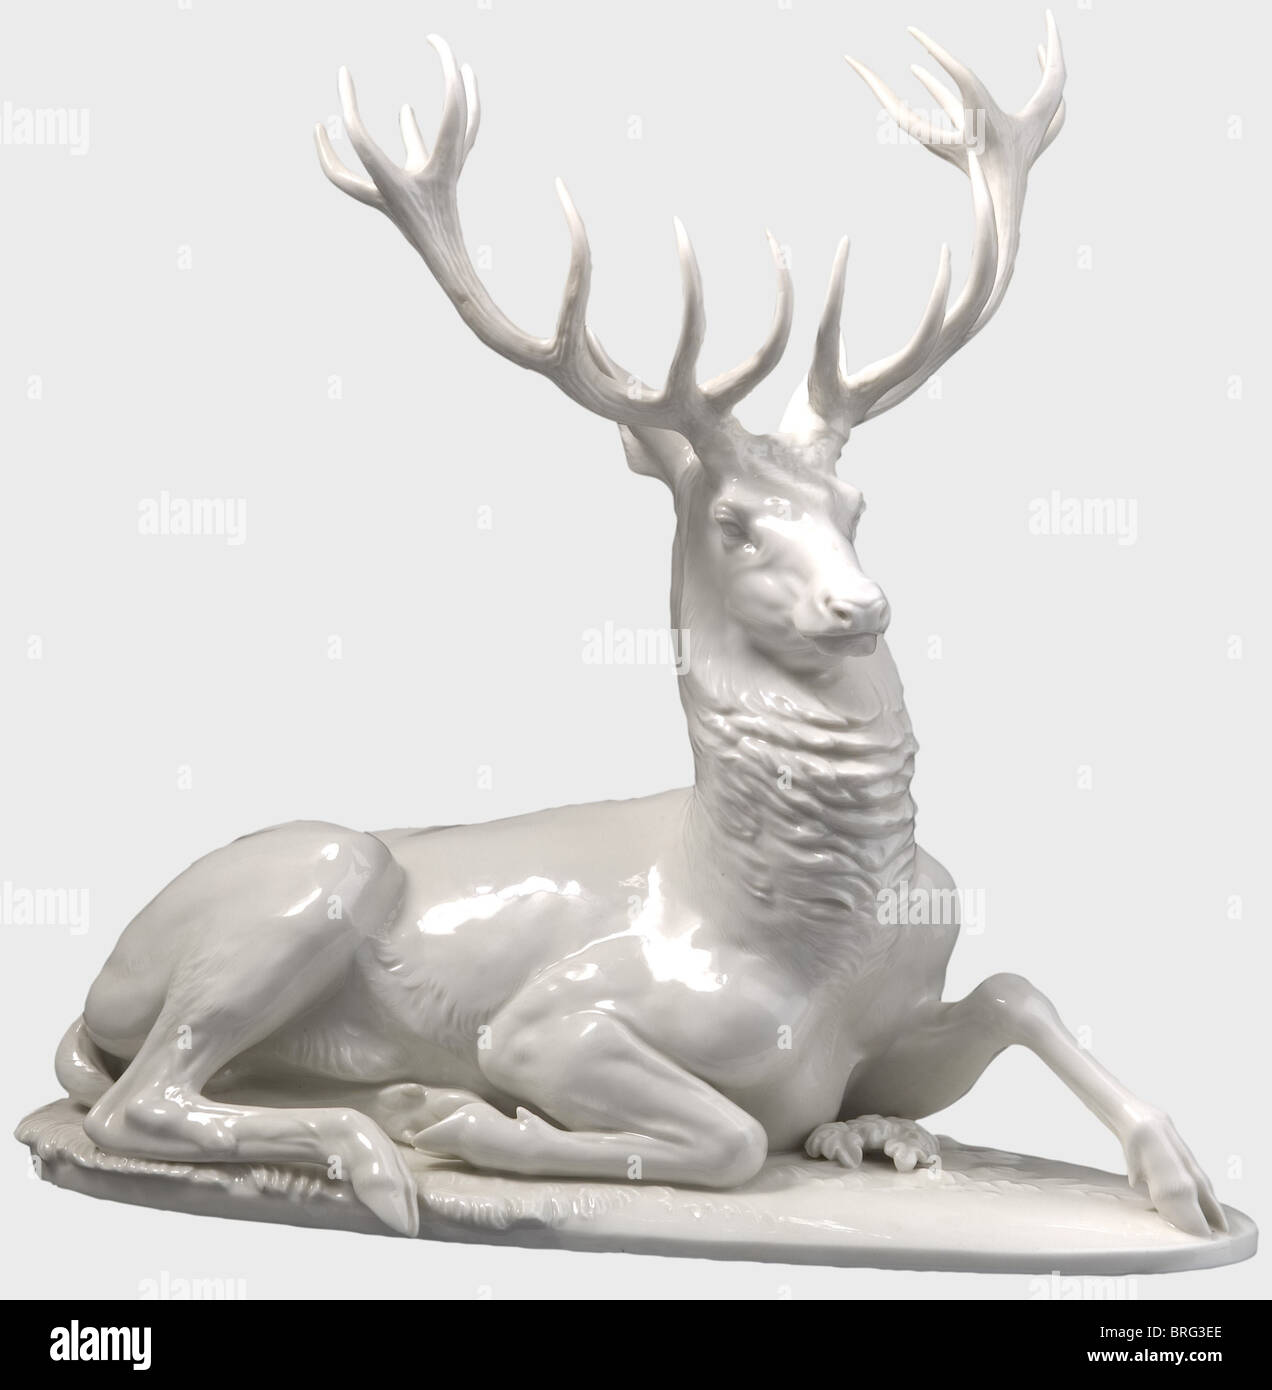 A recumbent stag., White glazed porcelain figure, separate inset antlers, and with the model number '60', the Allach press mark in the octagon, and 'Prof. Th. Kärner' on the bottom. Ears and antlers restored. Height 35 cm. historic, historical, 1930s, 1930s, 20th century, object, objects, stills, clipping, clippings, cut out, cut-out, cut-outs, Additional-Rights-Clearences-Not Available Stock Photo